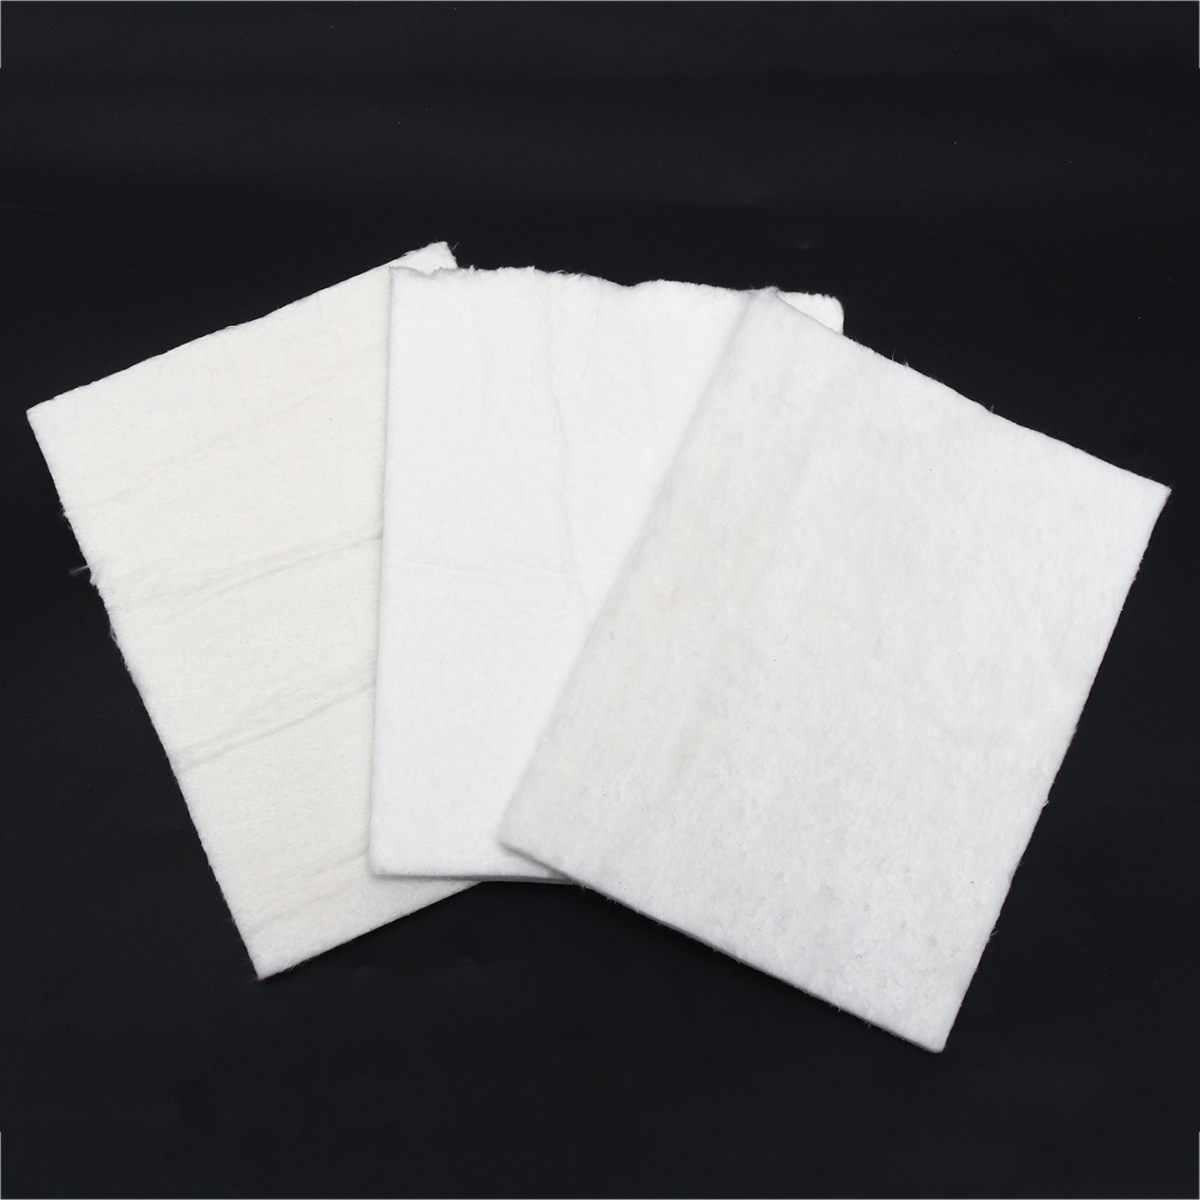 3610mm-Aerogel-Insulation-Hydrophobic-Mat-Foot-Low-to-High-Temp-20x15cm-Water-Pipe-Insulation-Mat-1321399-5